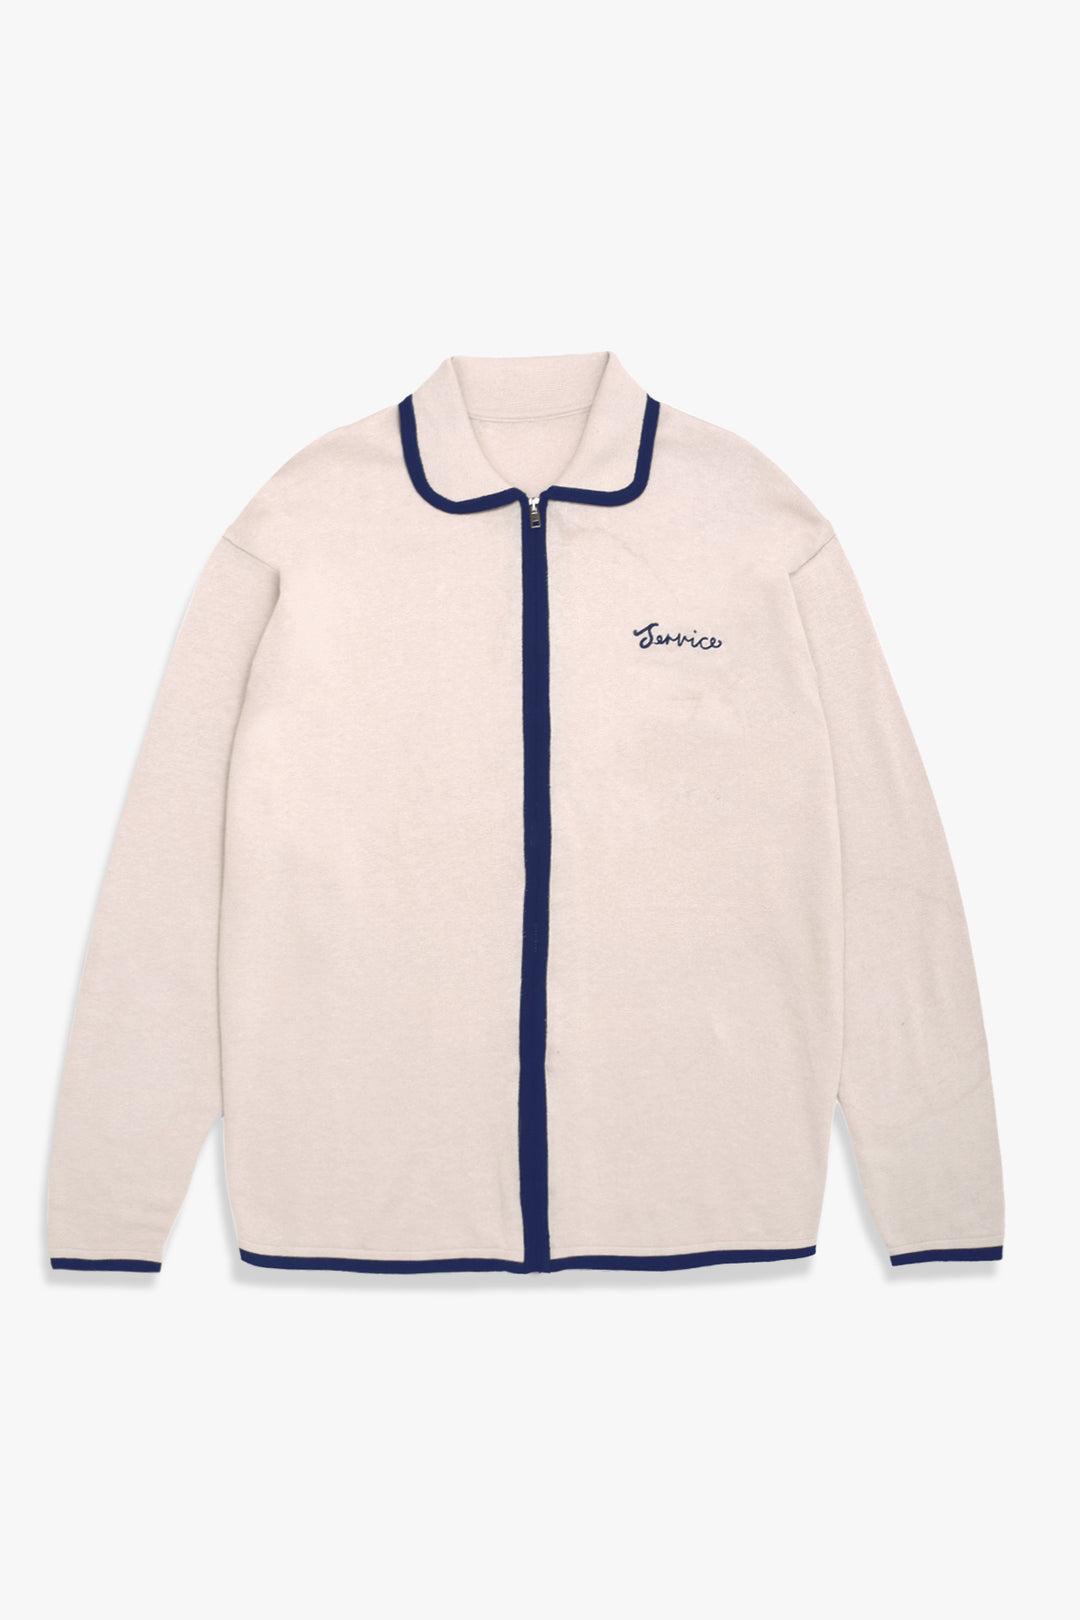 Service Works - Knitted Script Shirt - Off White